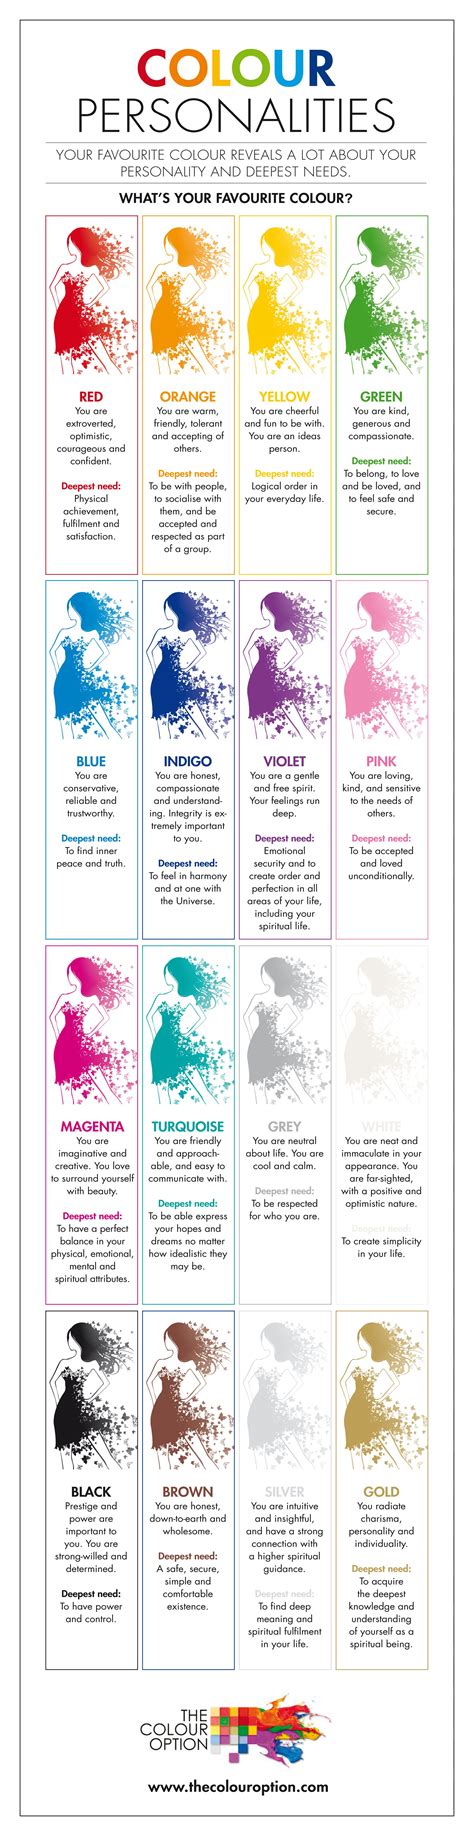 Your Favourite Colour Says A Lot About Your Personality And Deepest